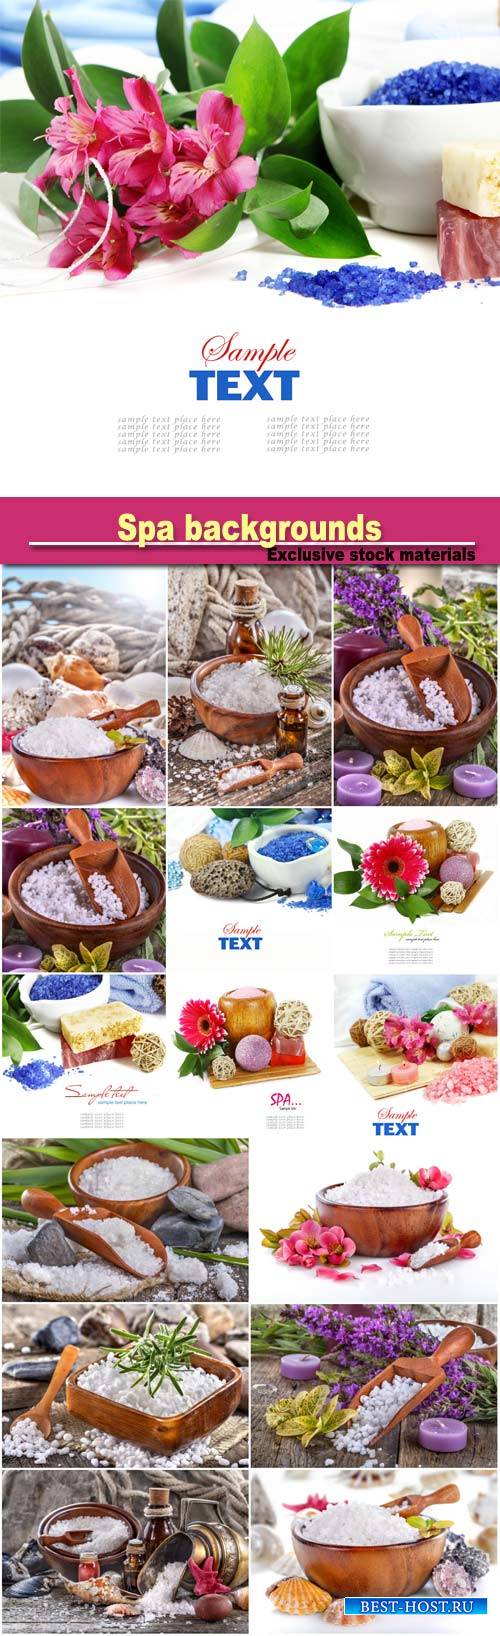 Spa backgrounds, salt bath in wooden spoon with flowers and  leaves in back ...